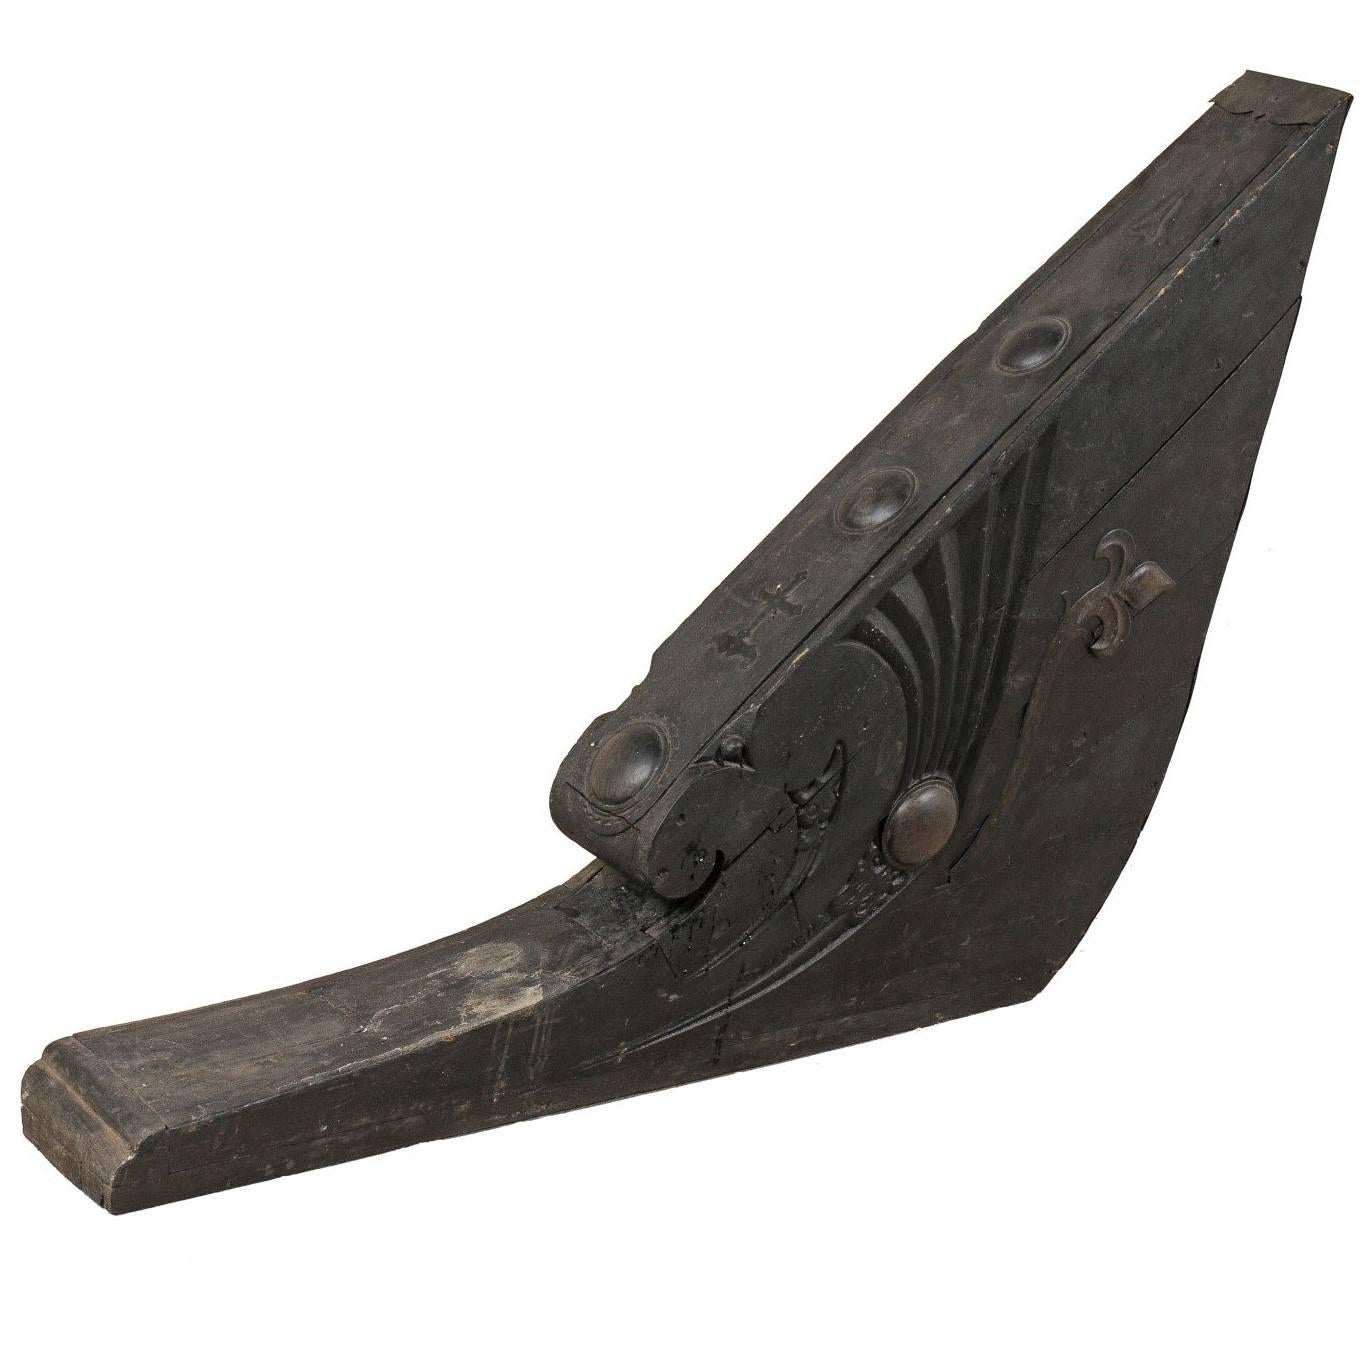 A Kerala Hand-Carved Wood Boat Prow with Lovely Curved Fleur-de-Lis Accents For Sale